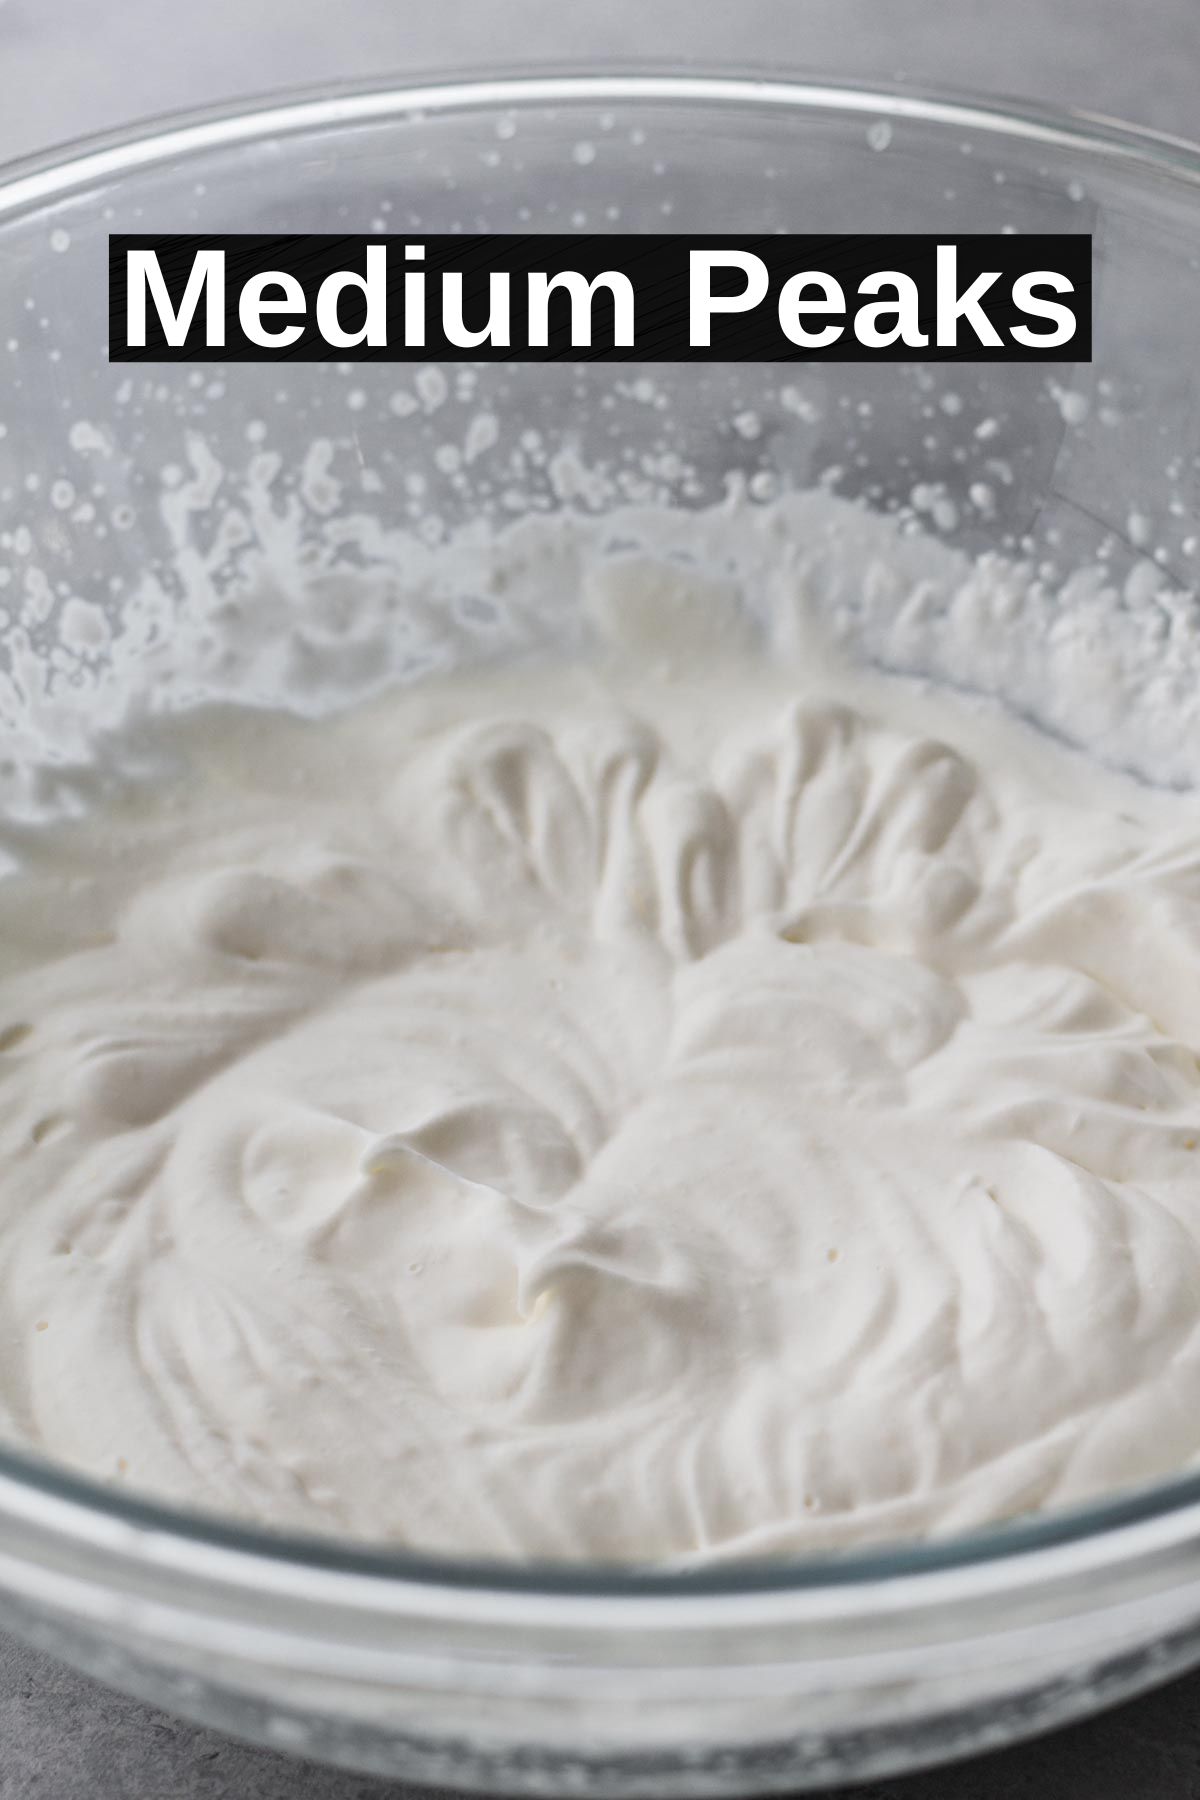 Glass bowl filled with medium peaks of whipped cream on a gray surface.